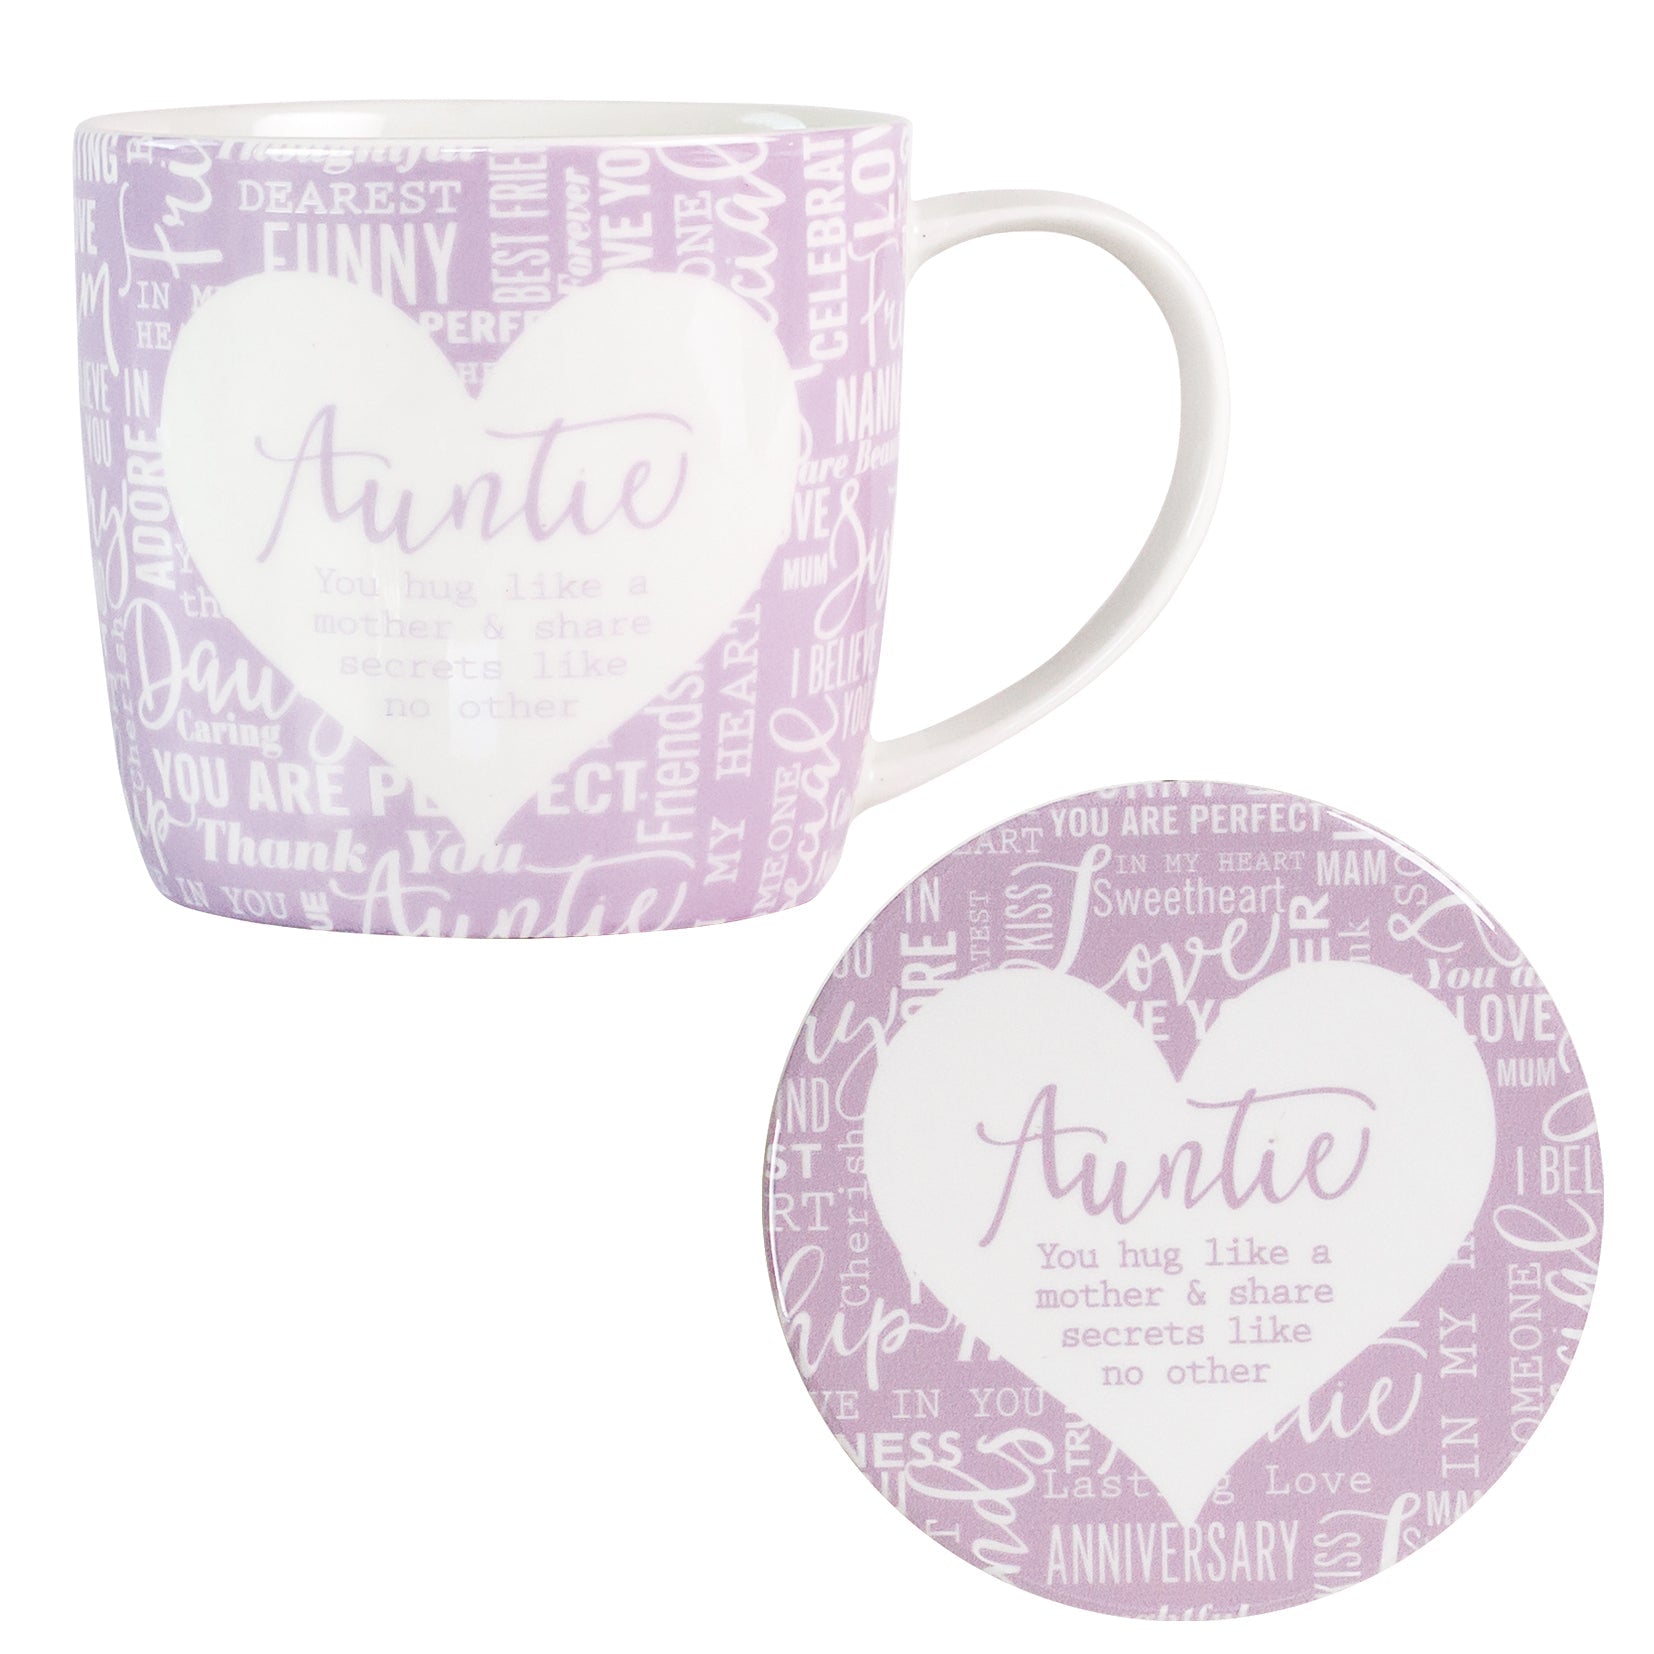 Auntie Sentiment Mug & Coaster Set - Said with Sentiment from thetraditionalgiftshop.com